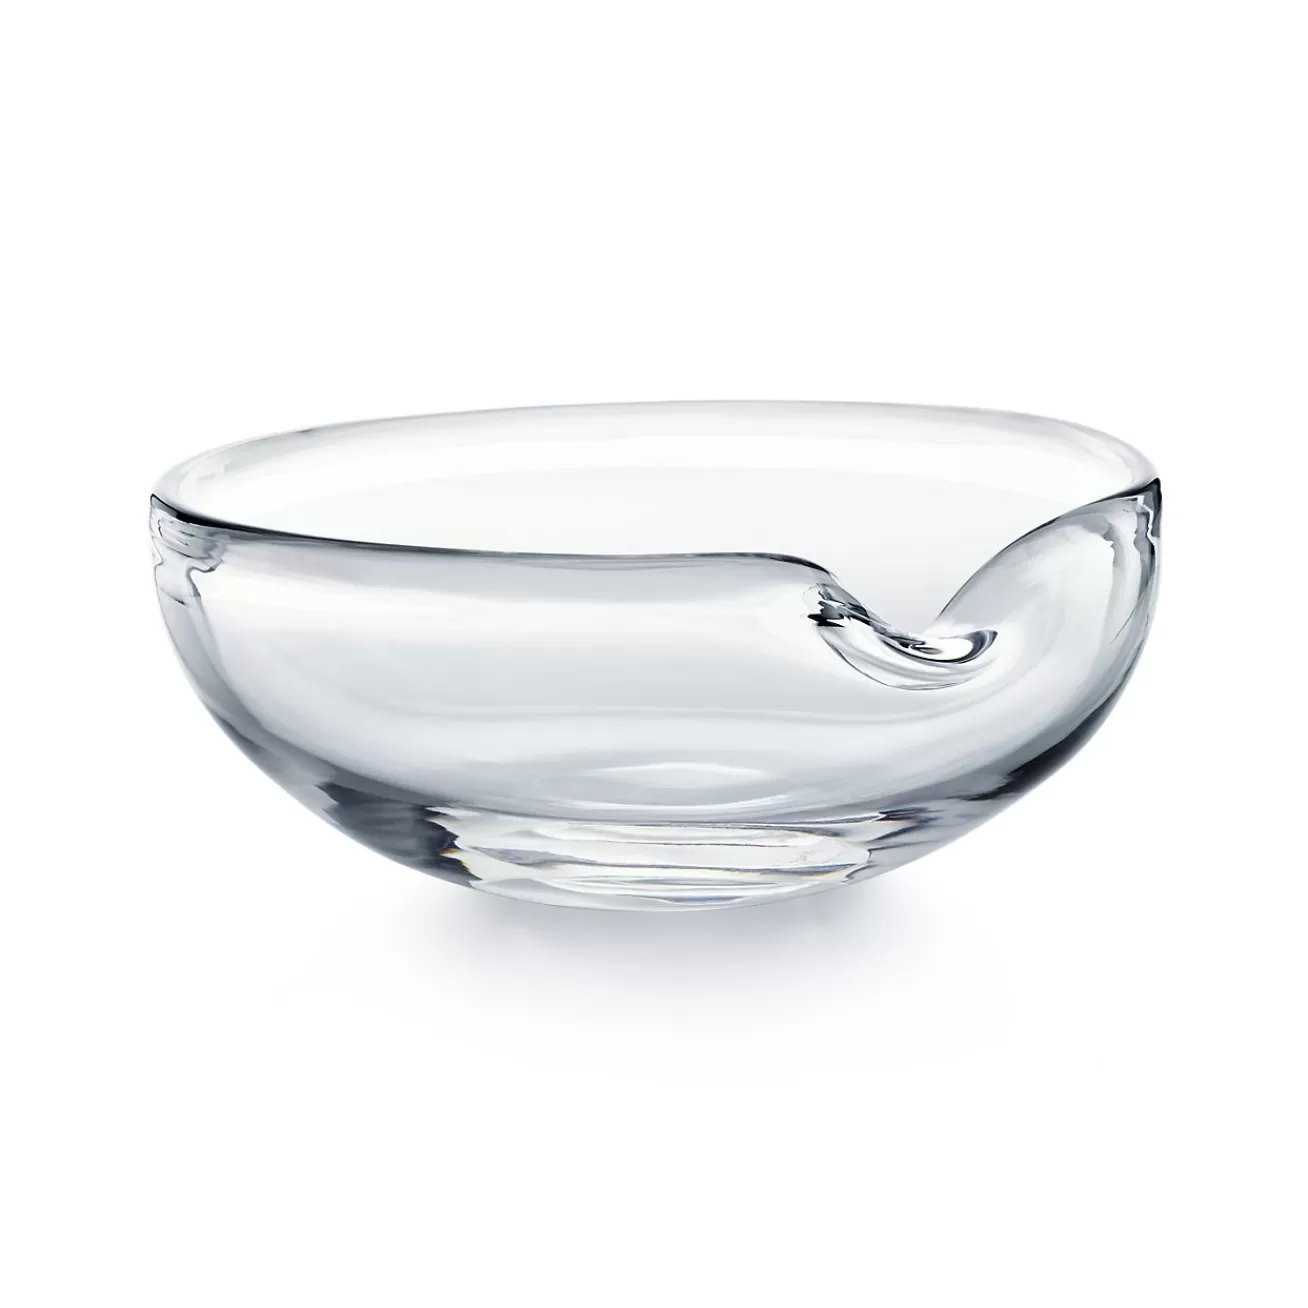 Tiffany & Co. Elsa Peretti® Thumbprint bowl in glass. More sizes available. | ^ The Home | Housewarming Gifts